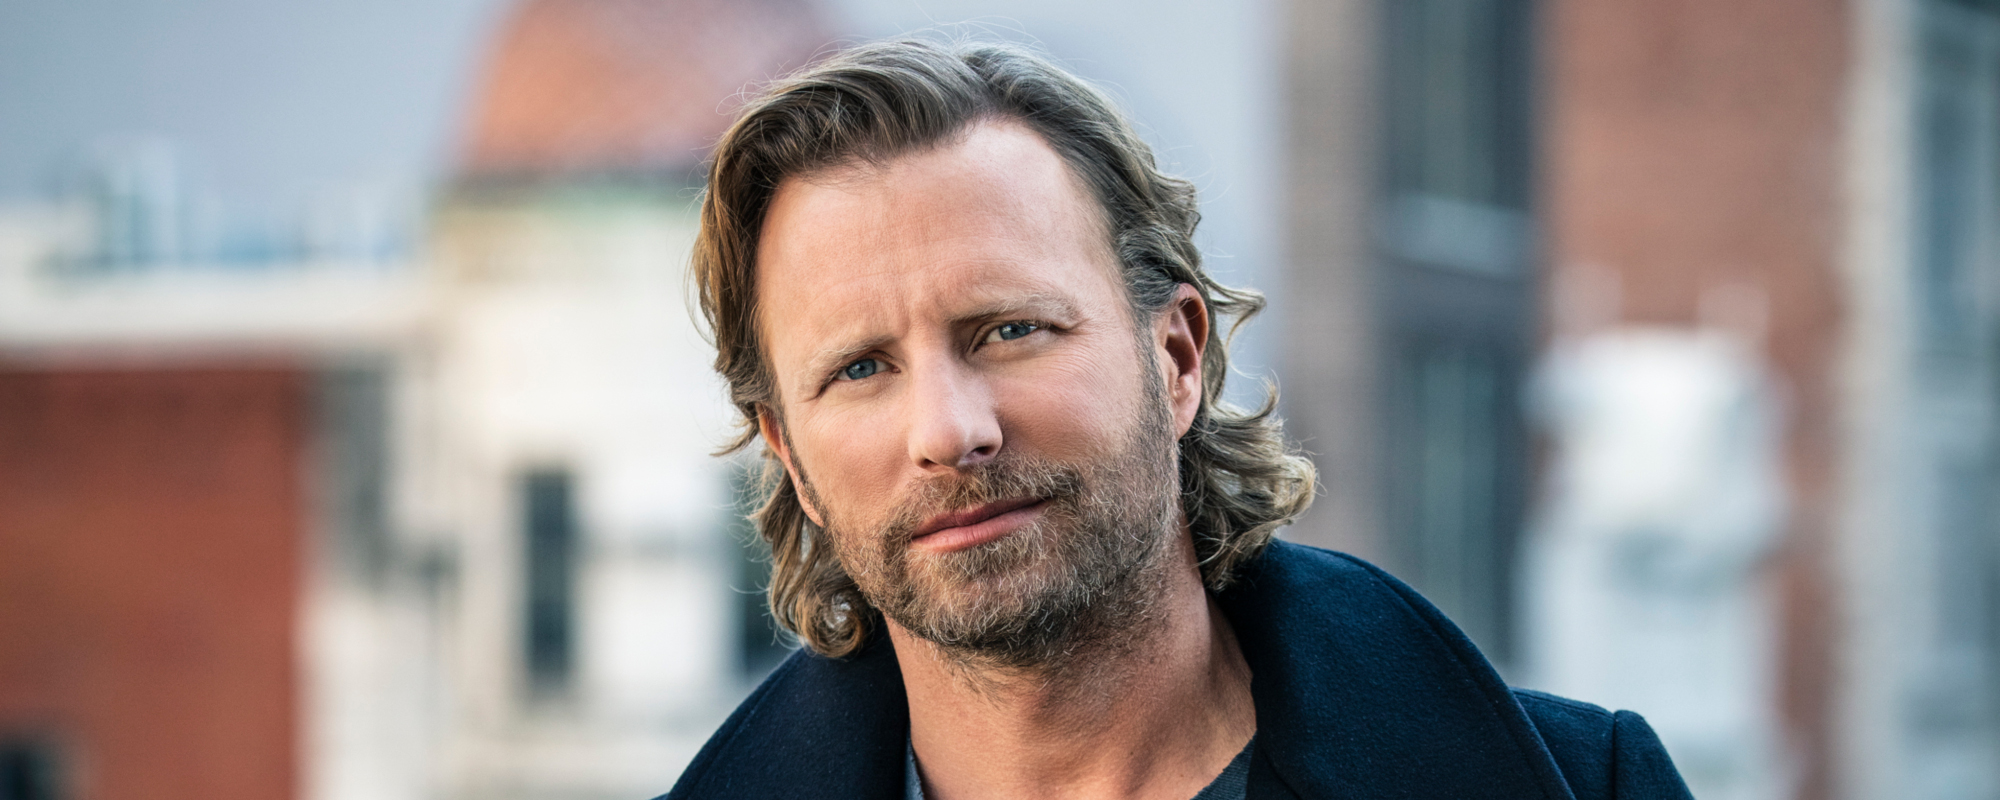 Dierks Bentley Explains Why He Turned Down Acting for Music